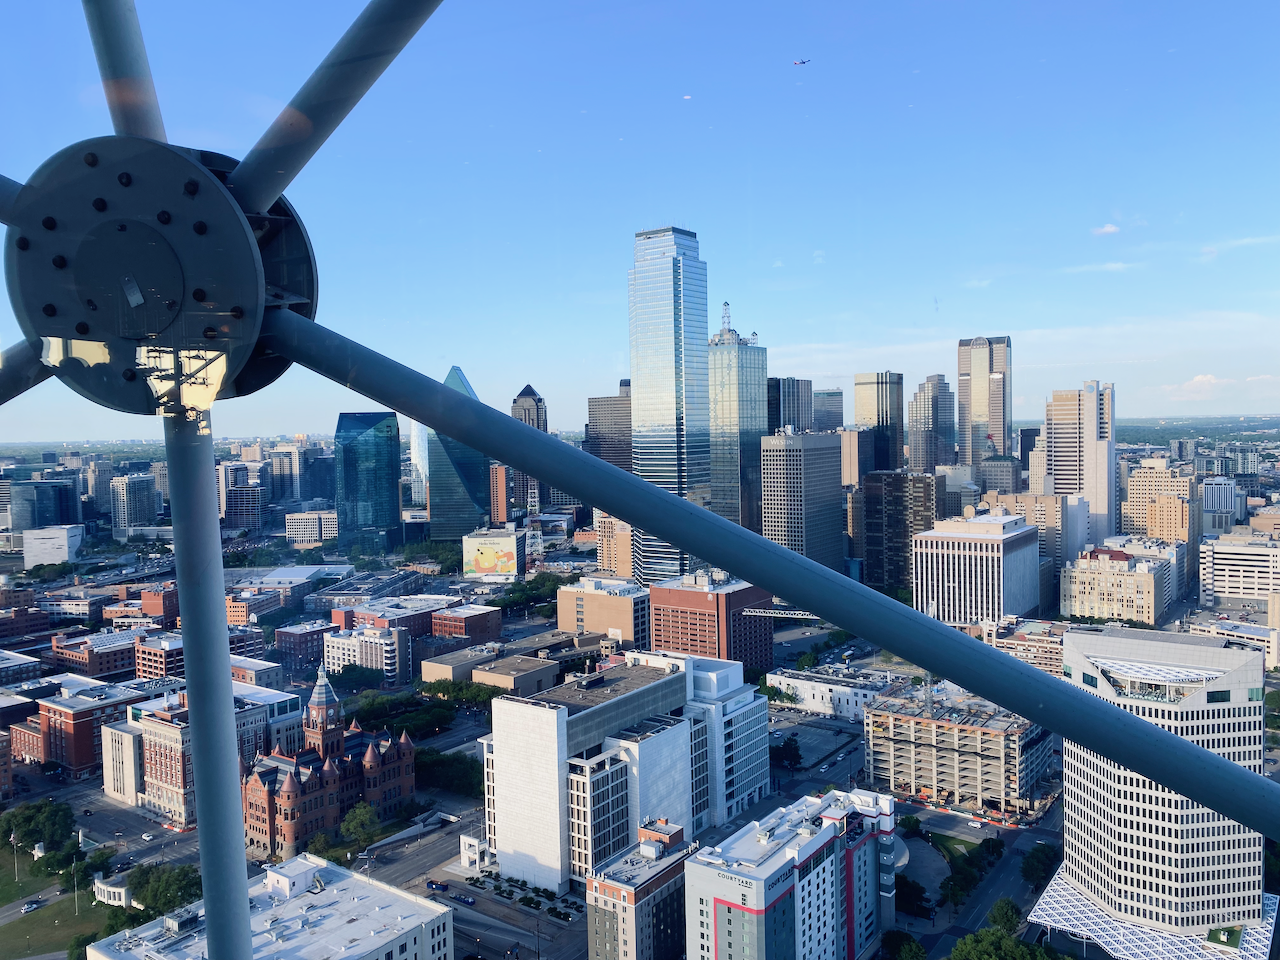 Wolfgang Puck Restaurant At Top of Dallas' Reunion Tower Shutters